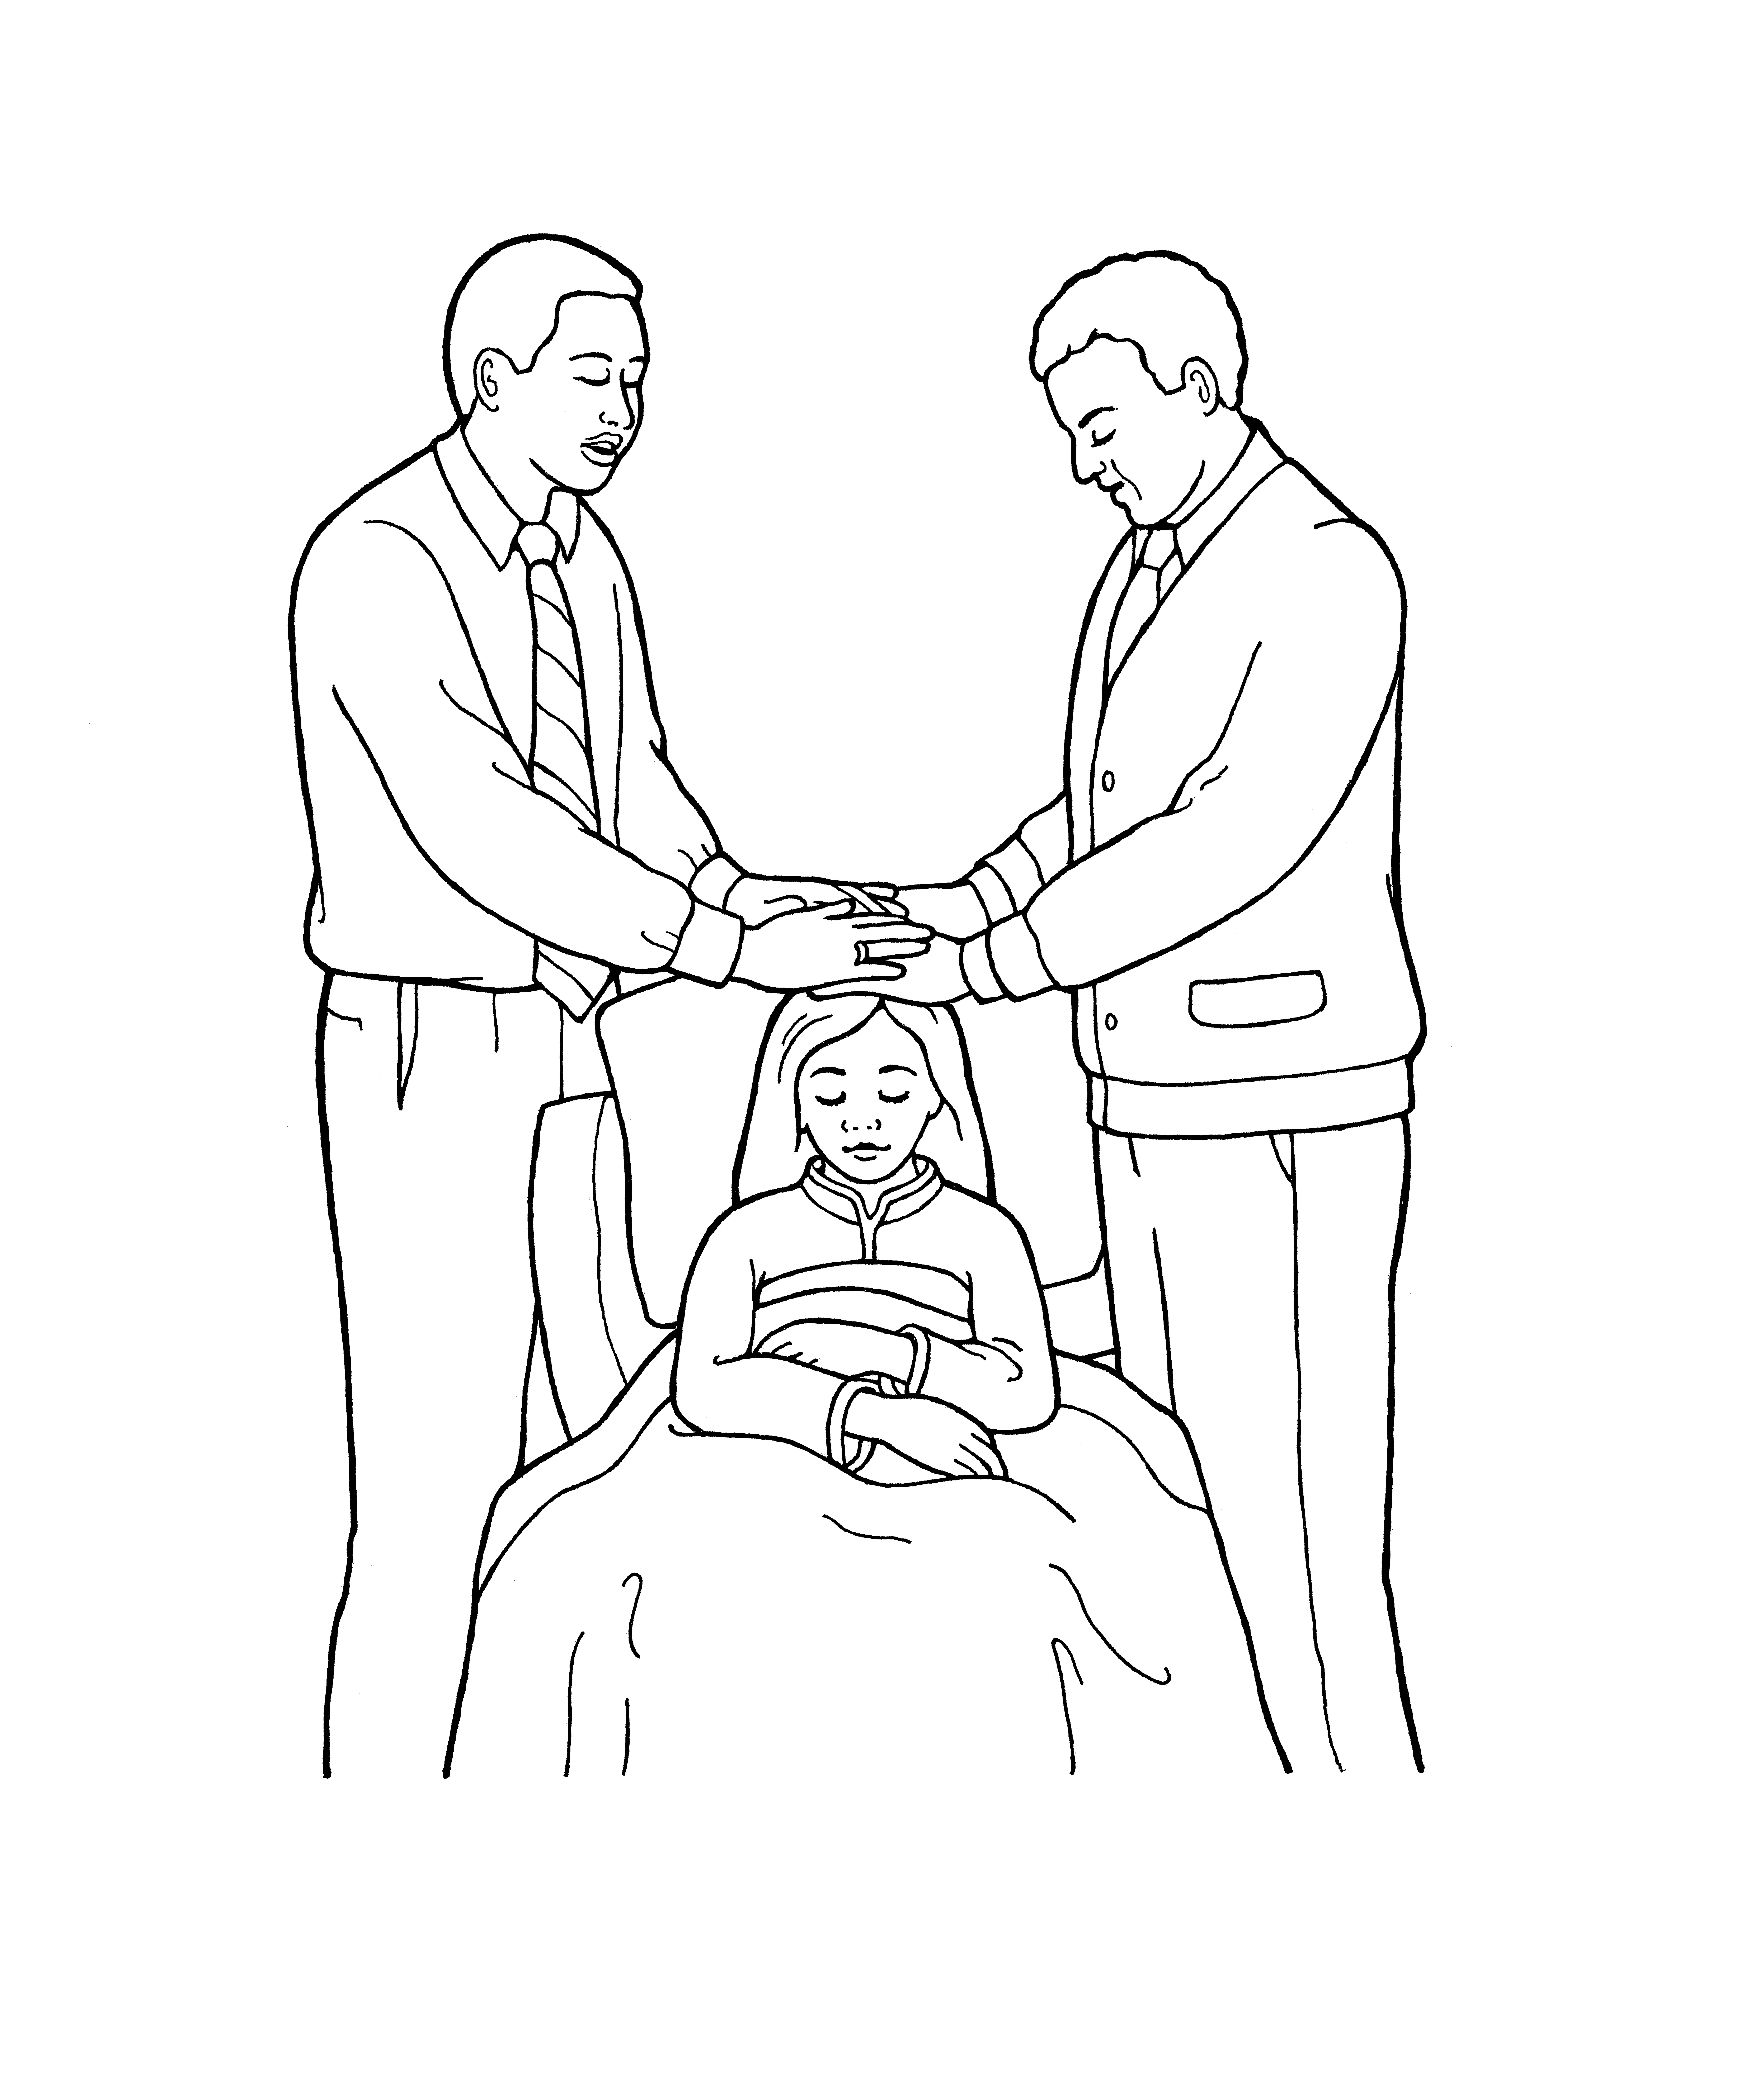 An illustration of the seventh article of faith—“Gifts” (two men giving a blessing to a sick girl).